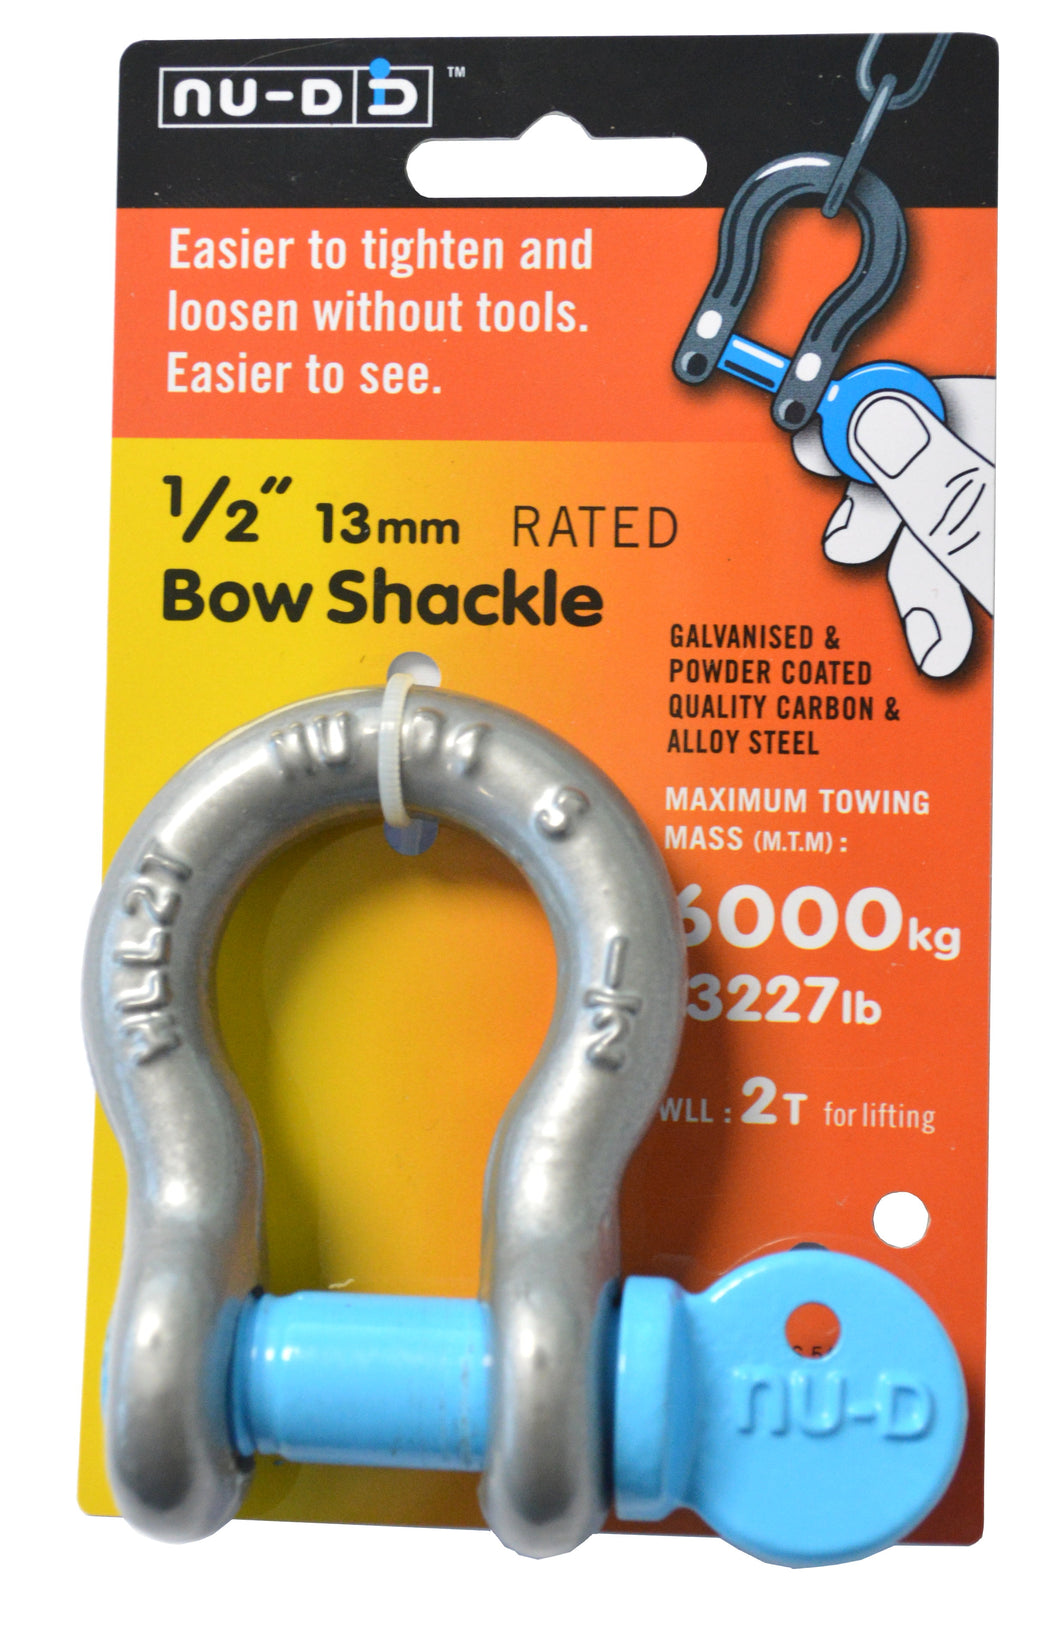 NU-D Bow Shackle Easy Tighten/Loosen Galvanised Tested WLL 2000Kg 13mm